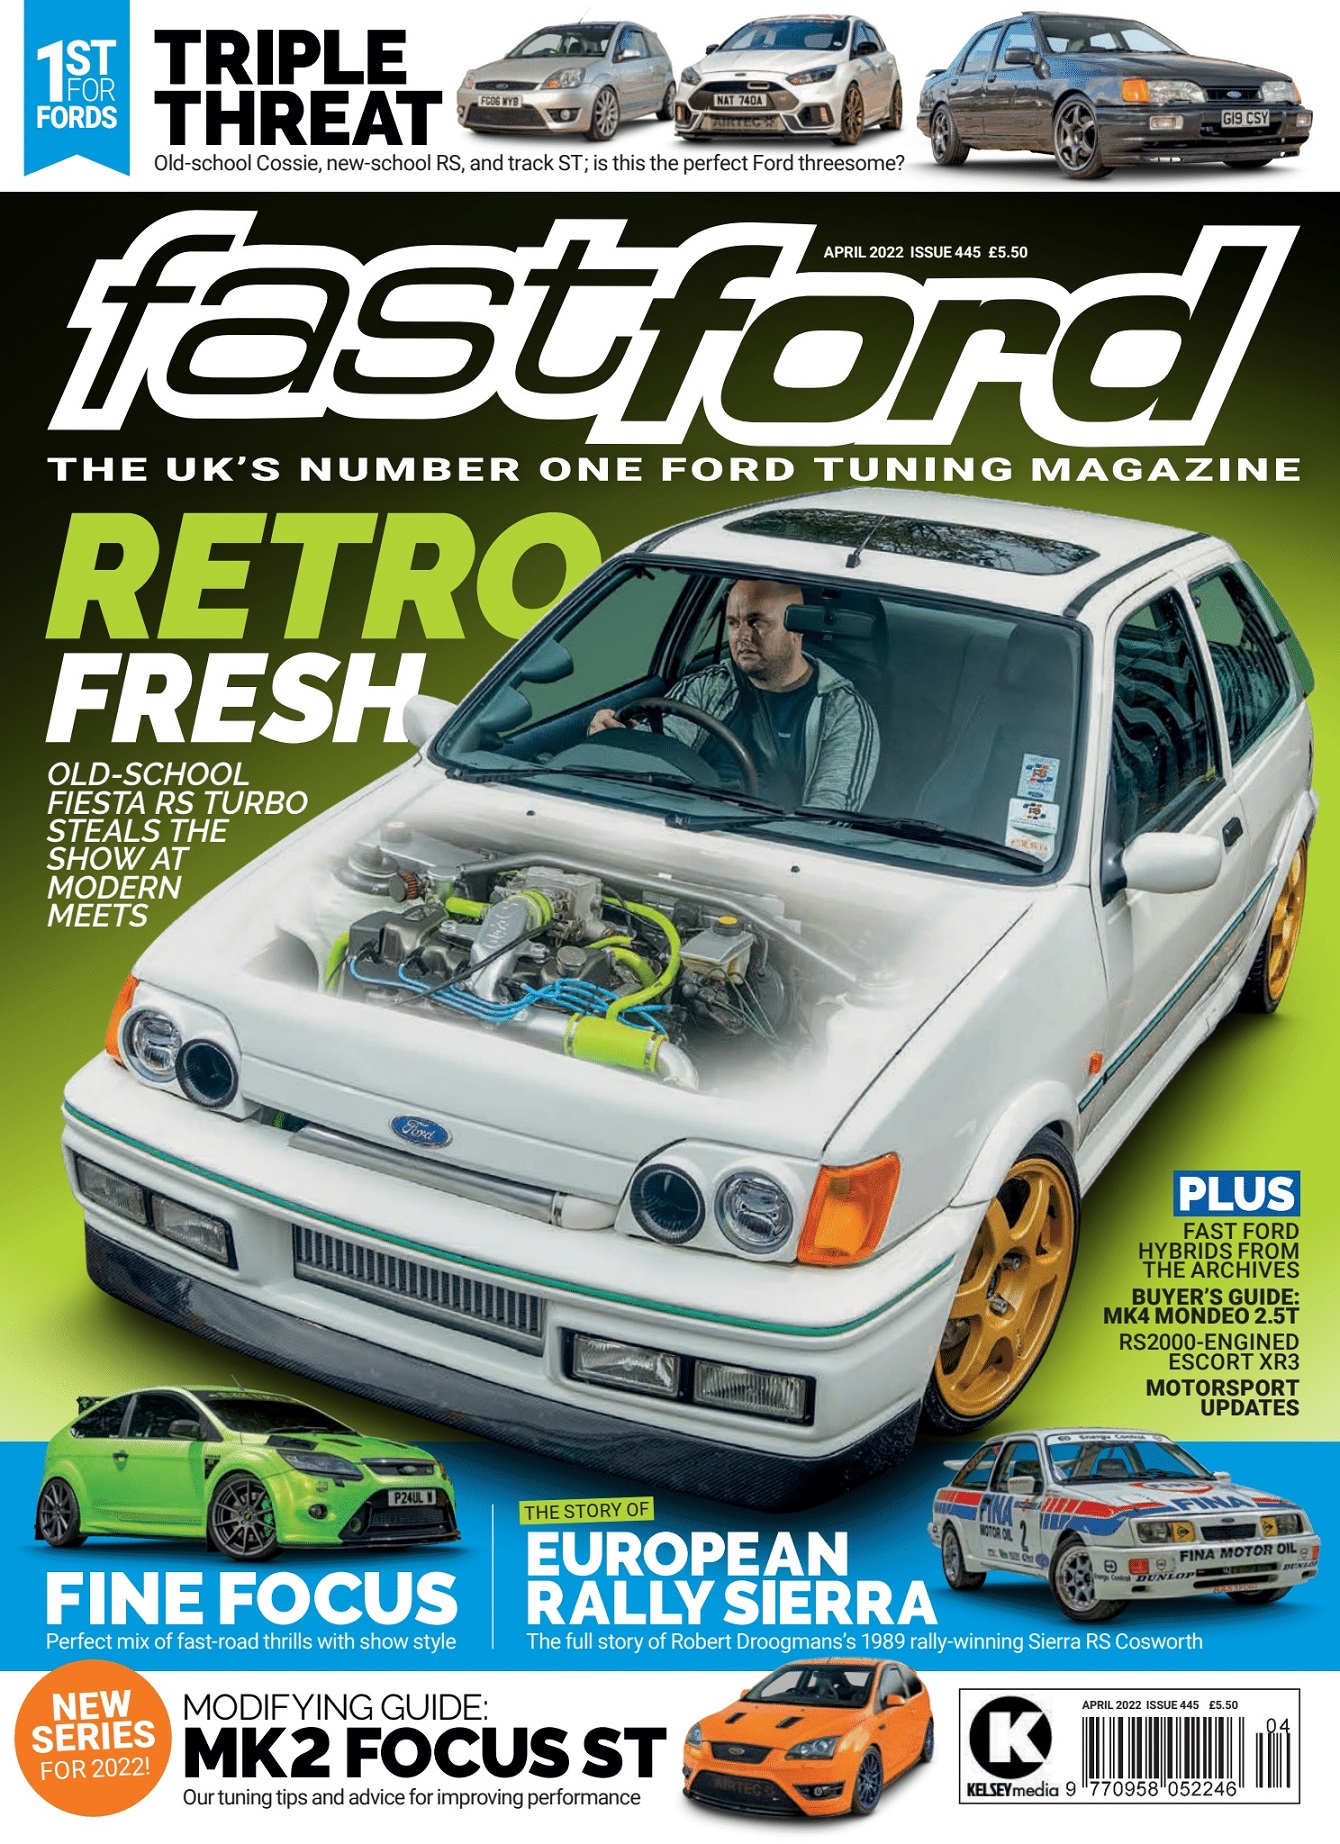 Fast Ford 3 for £5